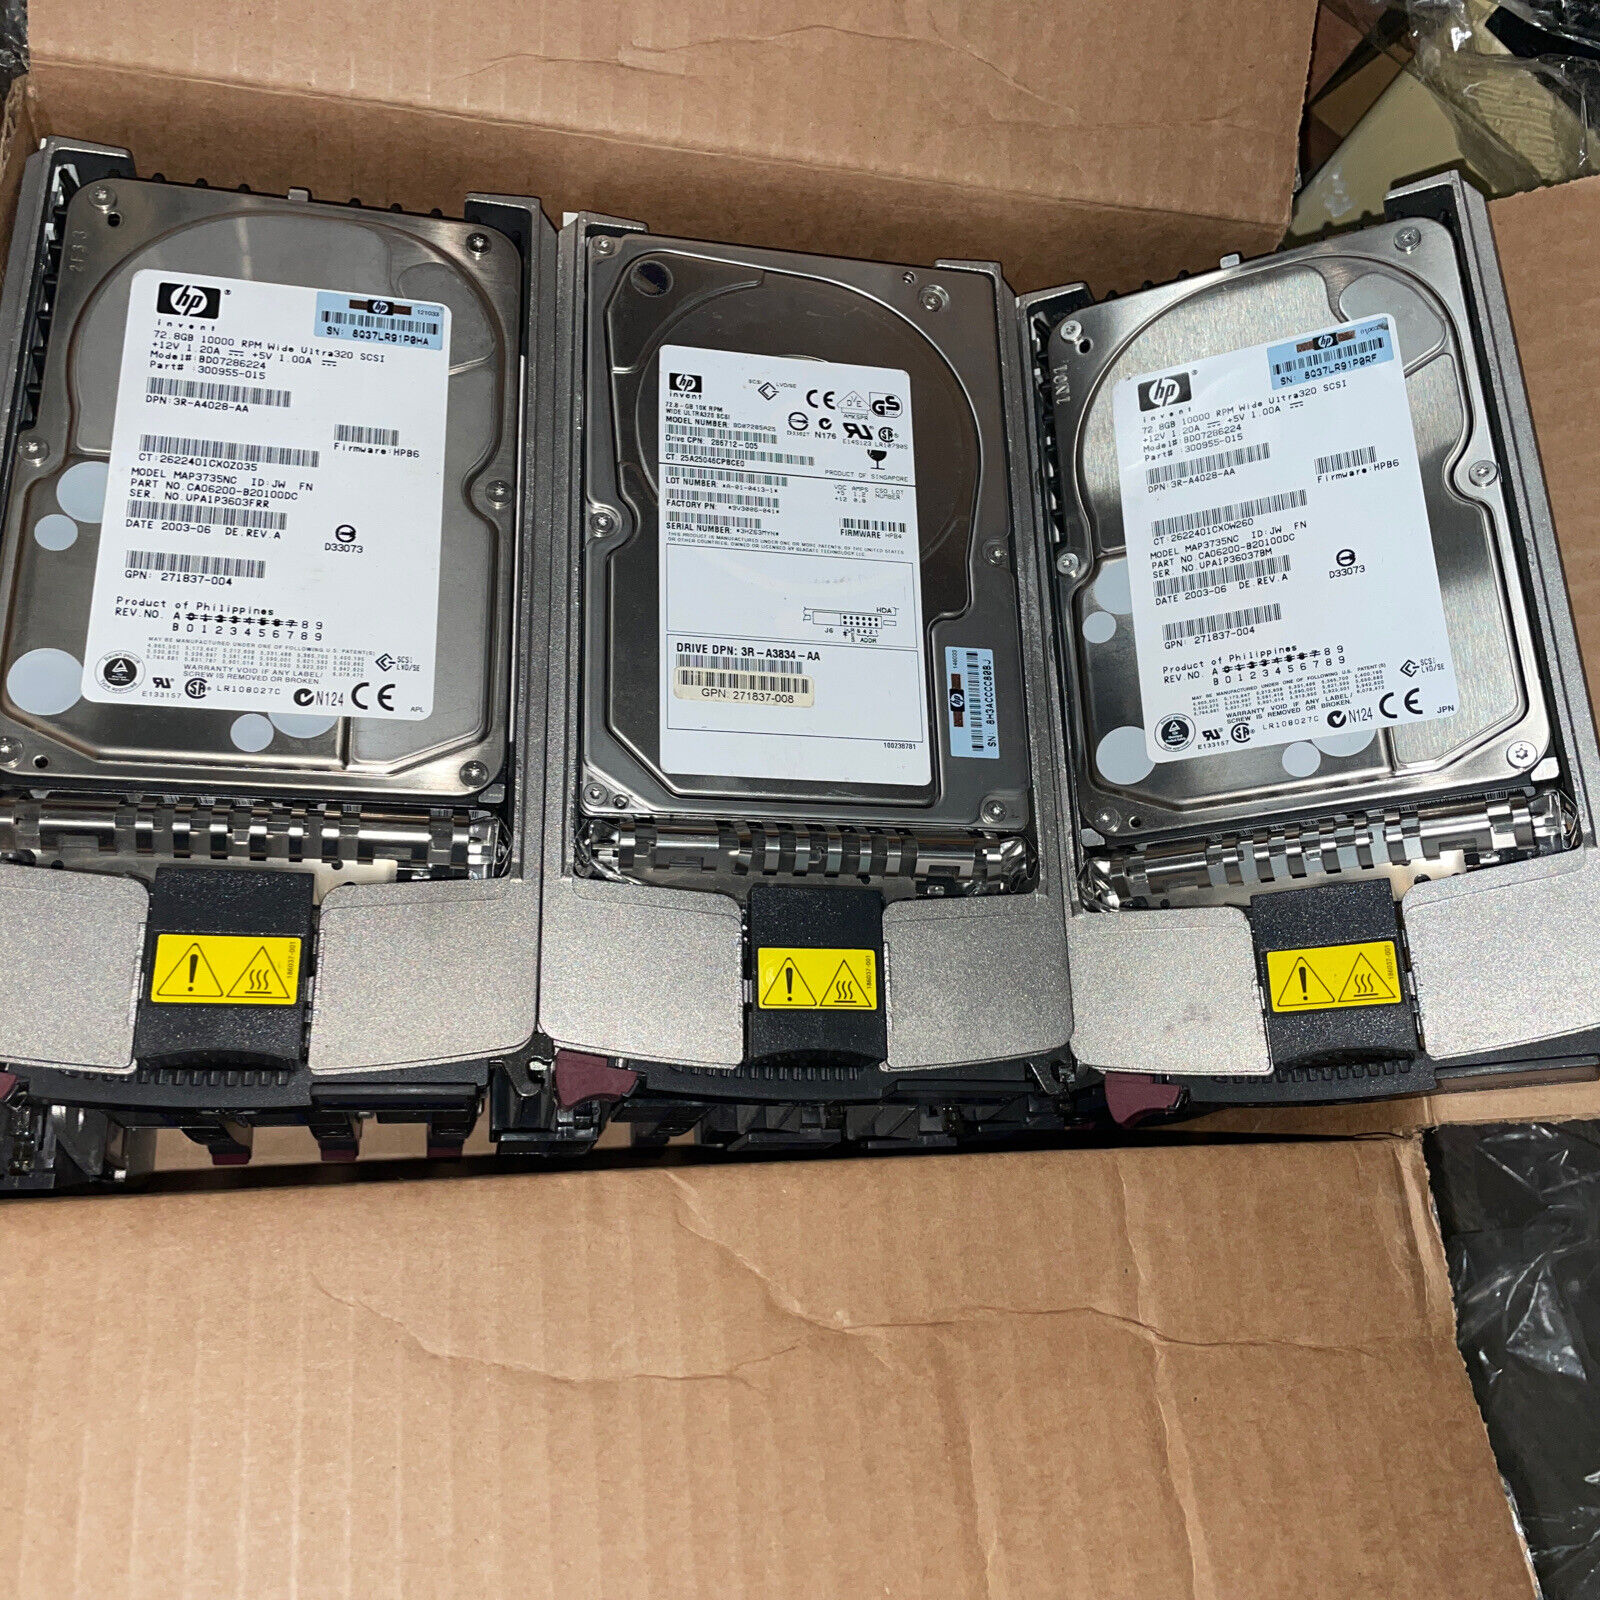 Lot of 14 HP 286714-B22/289042-001 72GB/146GB 10K ultra 320 scsi drive with tray